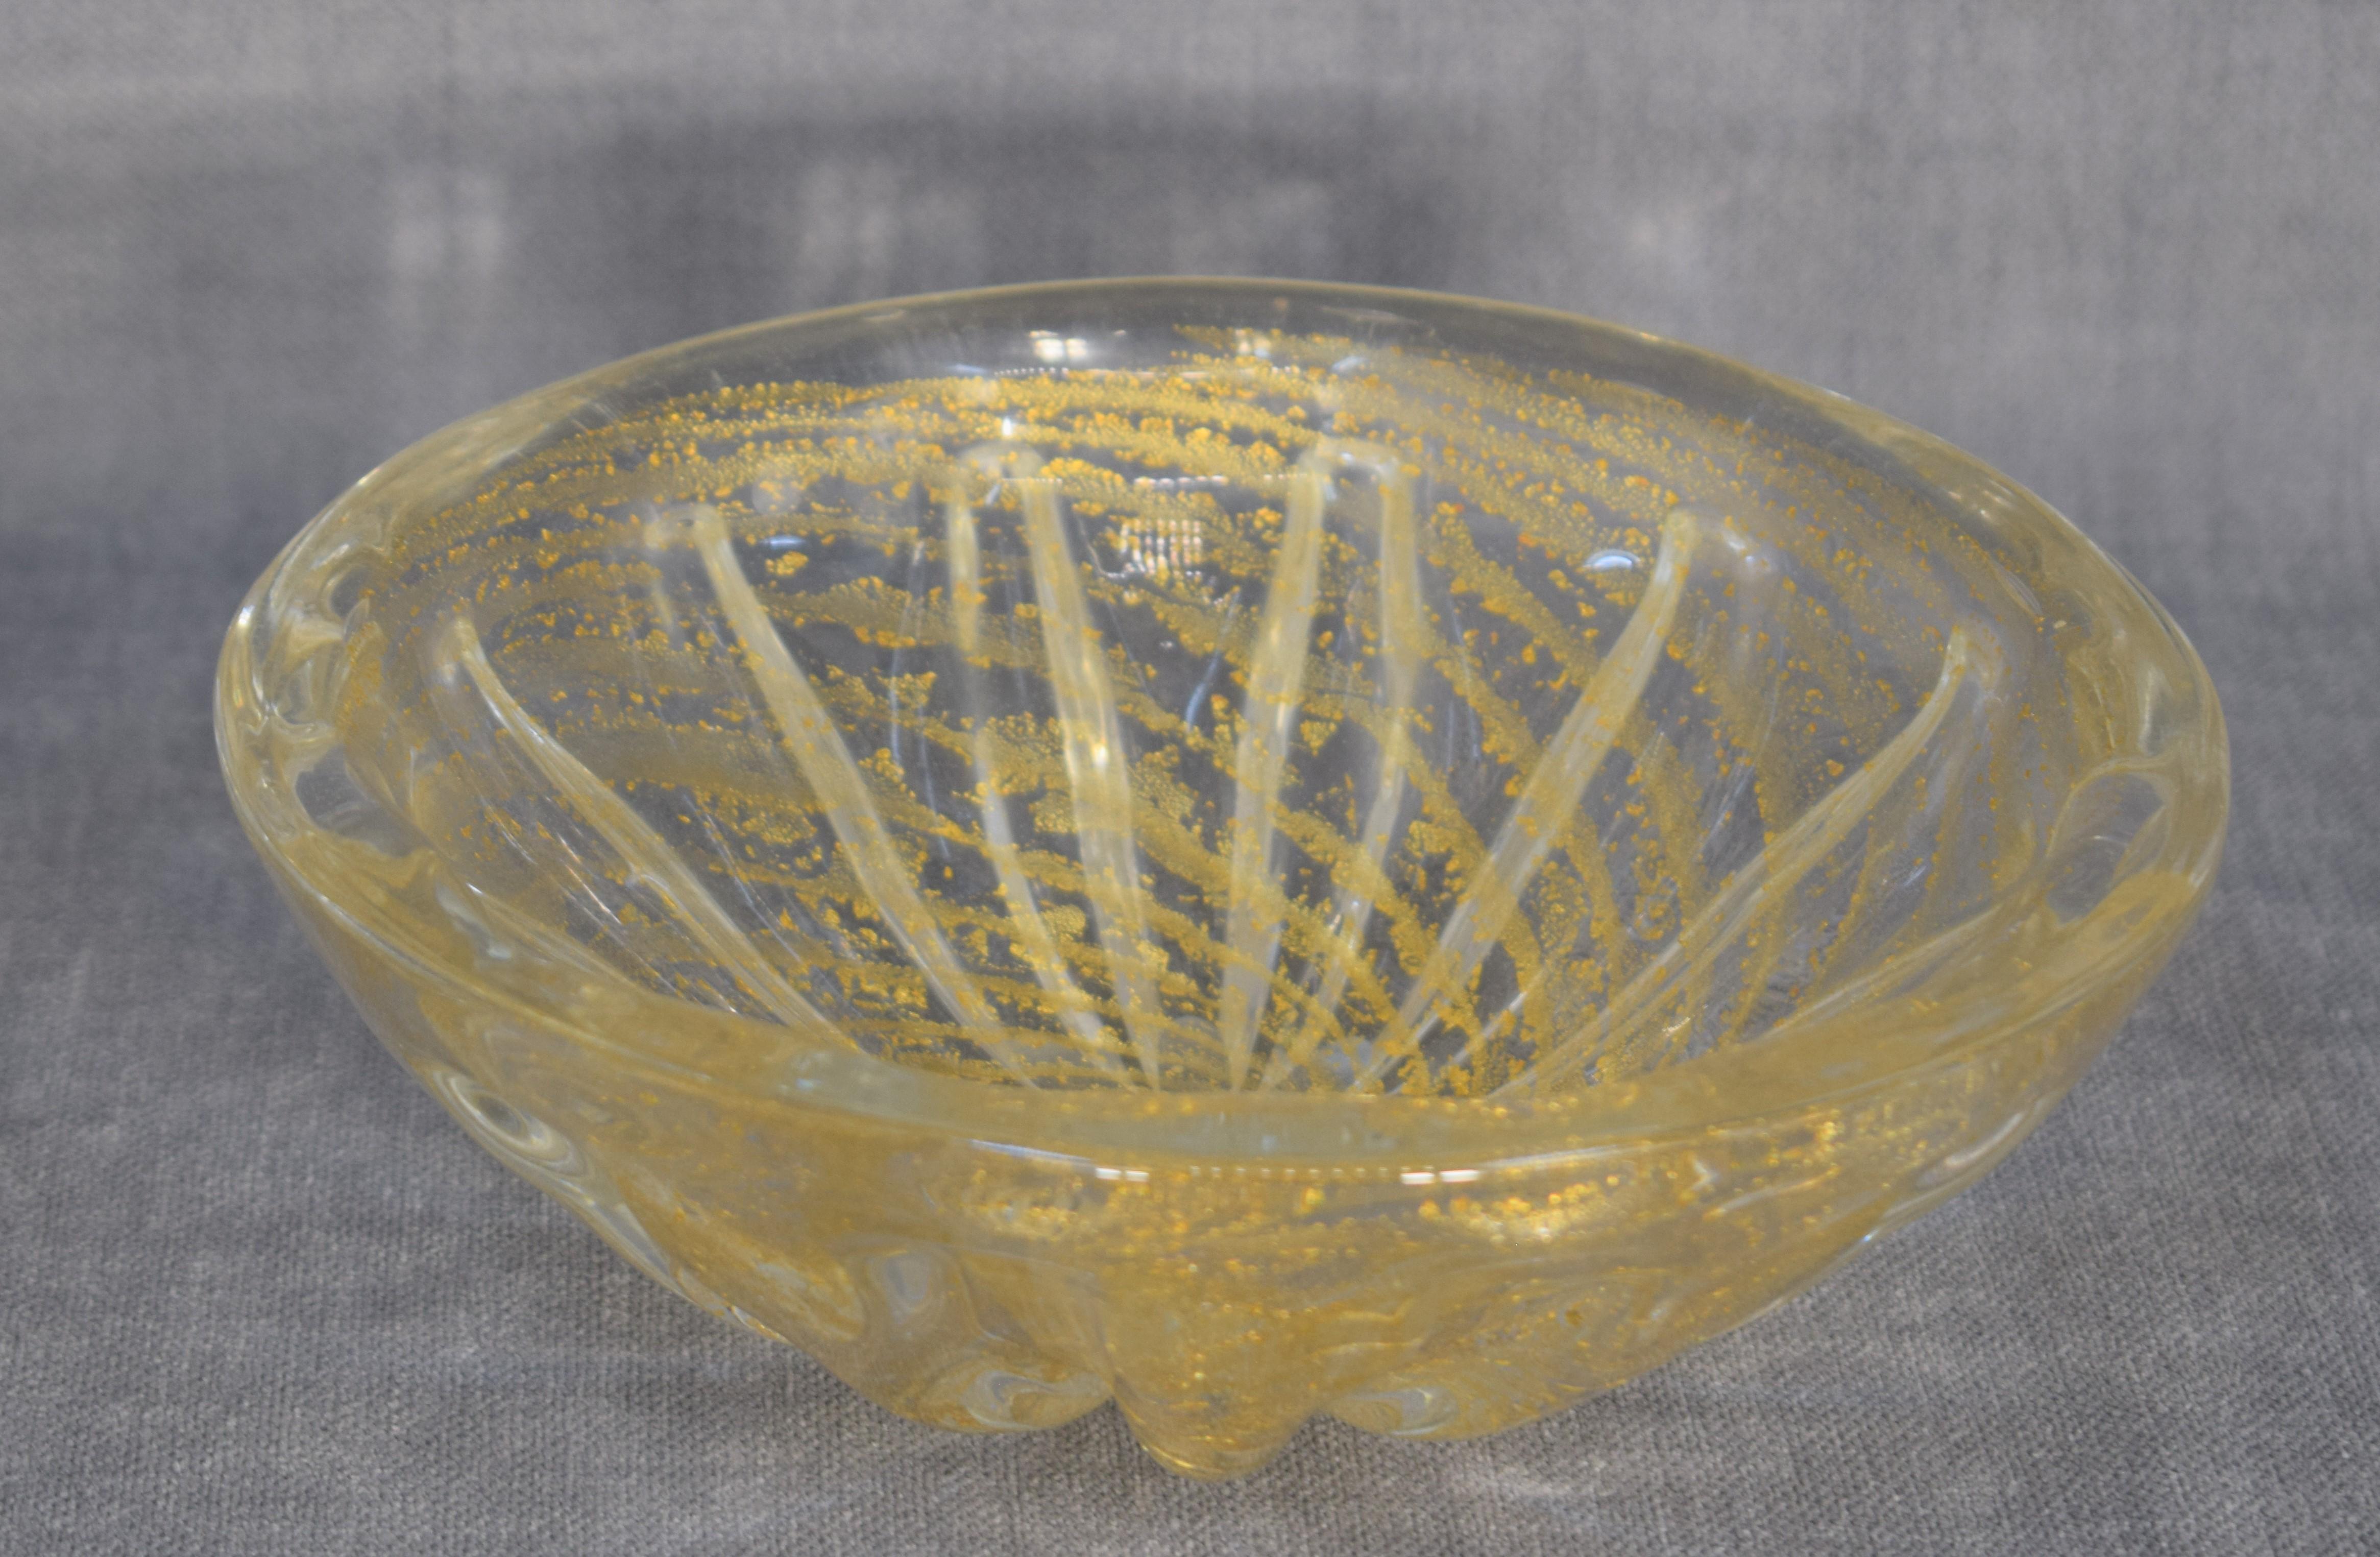 Italian bowl glass by Barovier & Toso, 1960s.

Dimensions: H= 8 cm; D= 20 cm.